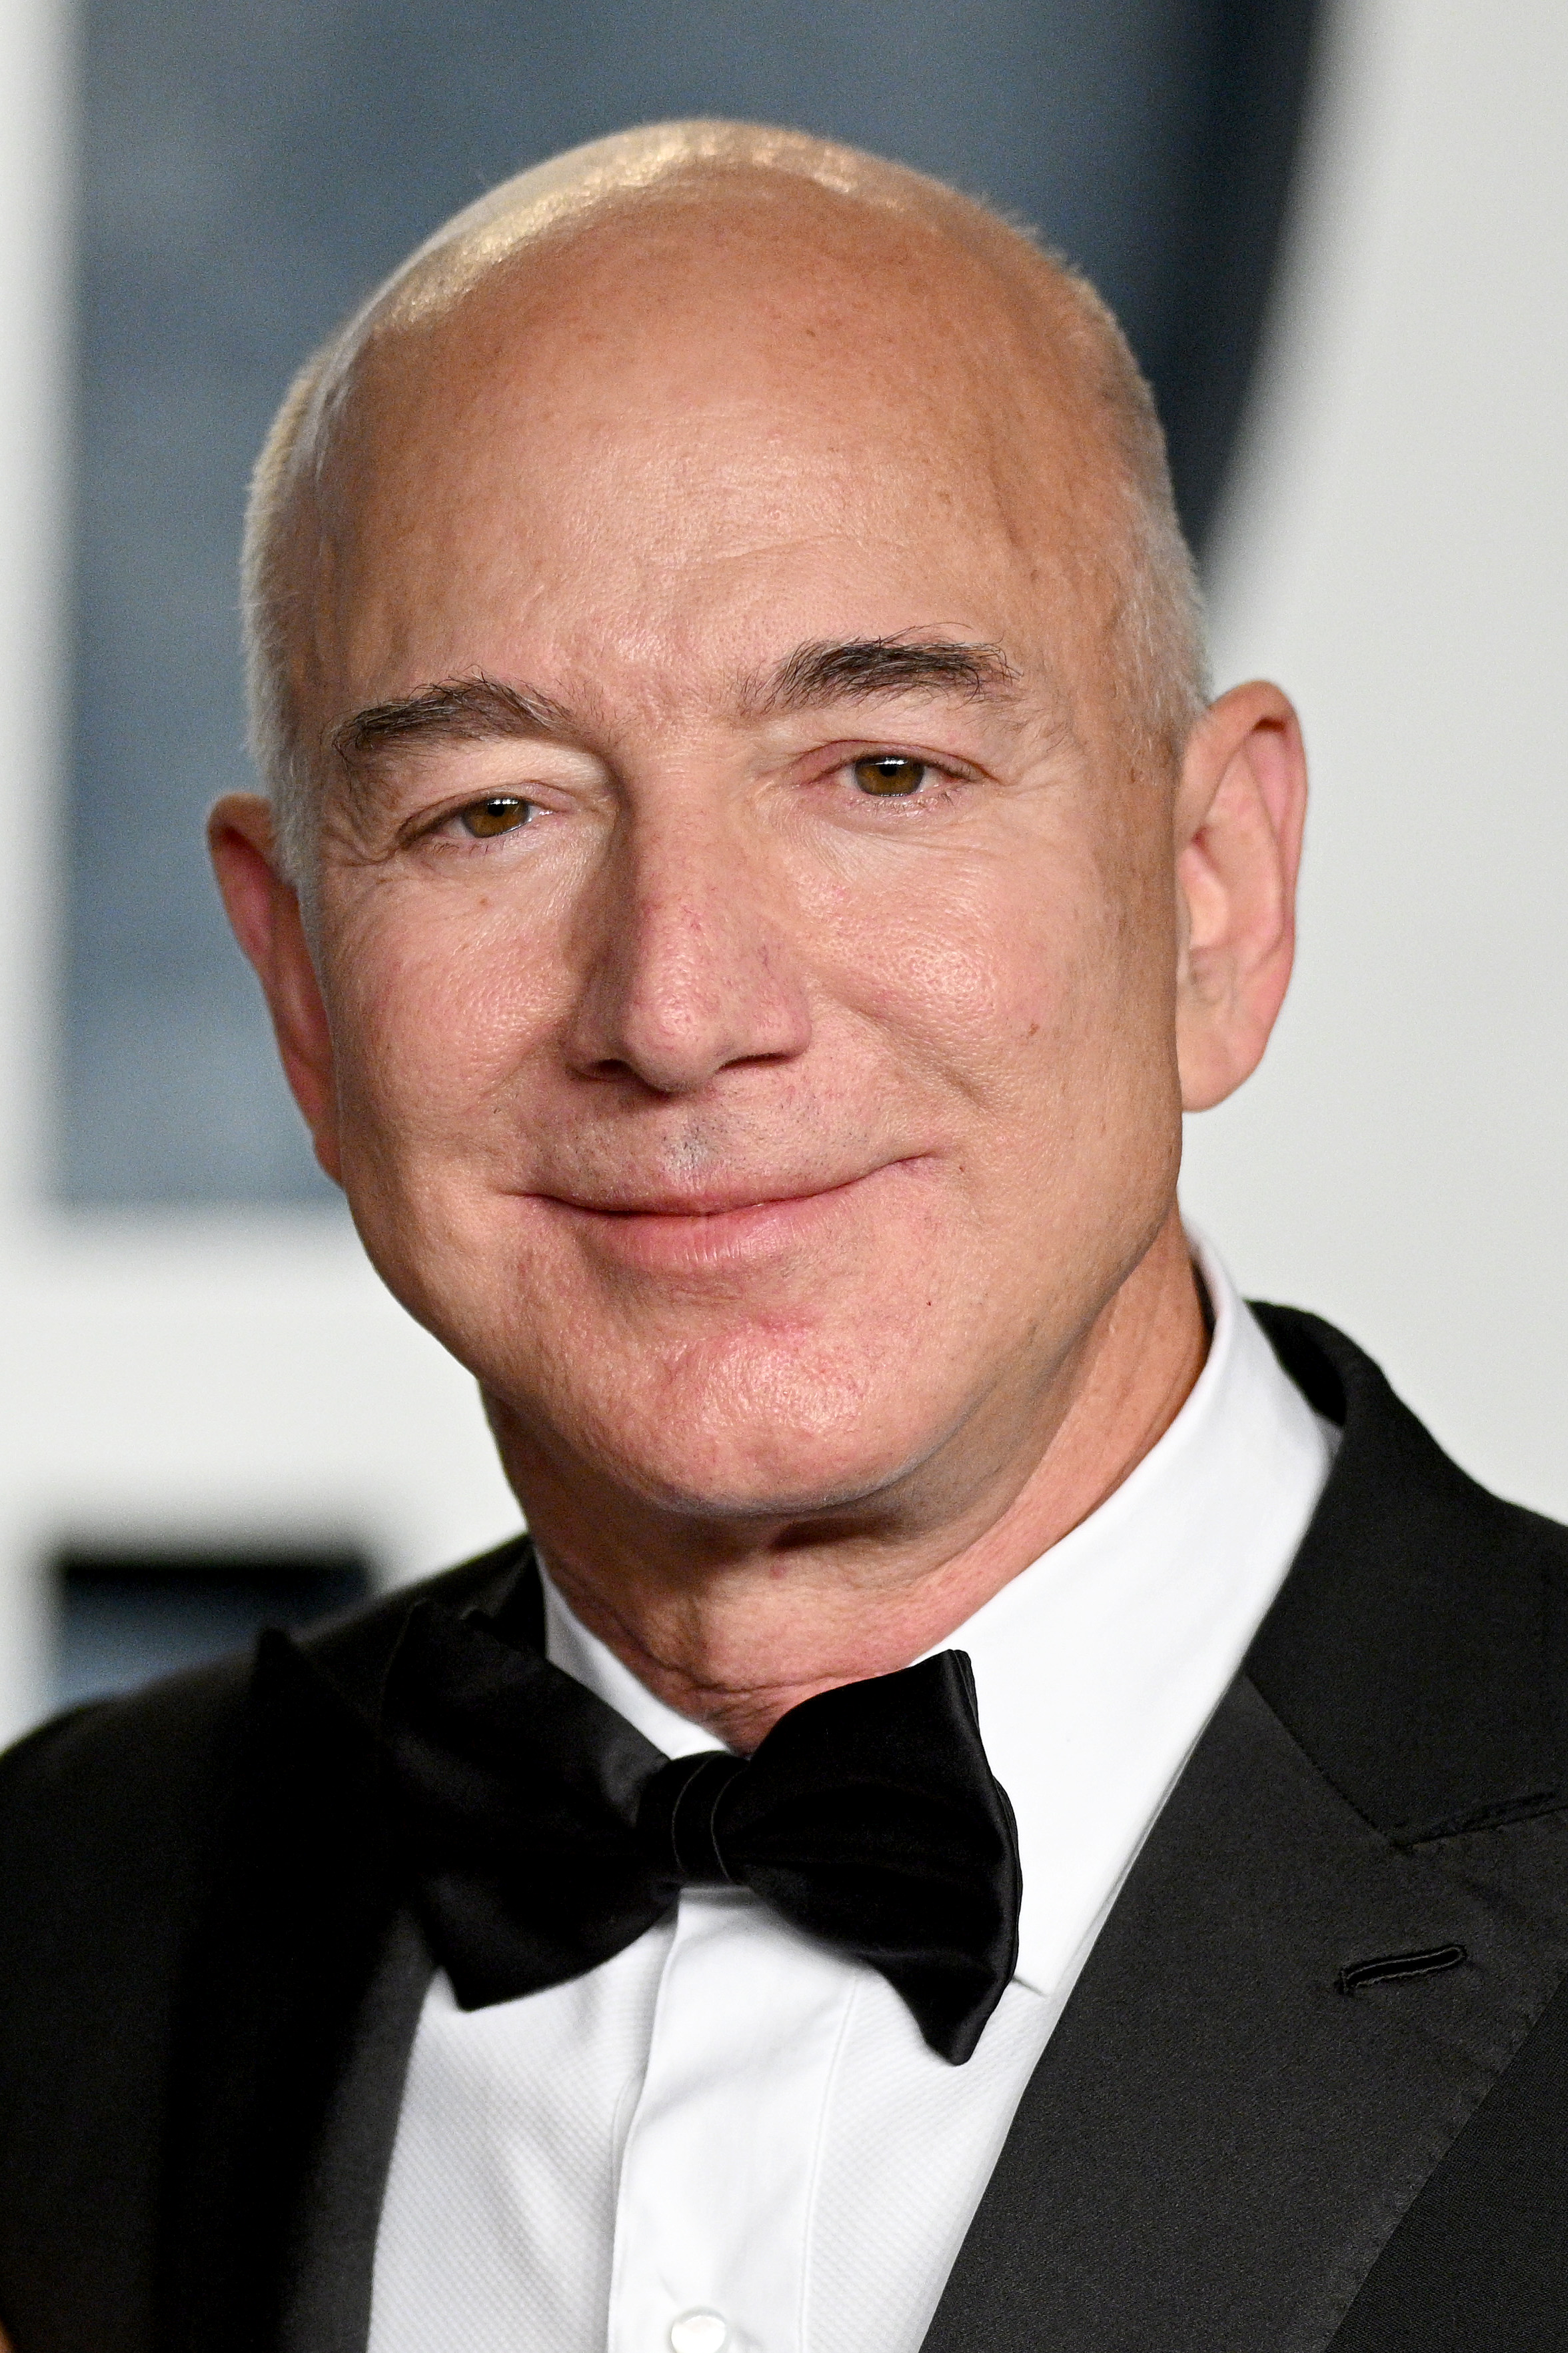 Jeff Bezos attends the 2023 Vanity Fair Oscar Party on March 12, 2023 in Beverly Hills, California | Source: Getty Images